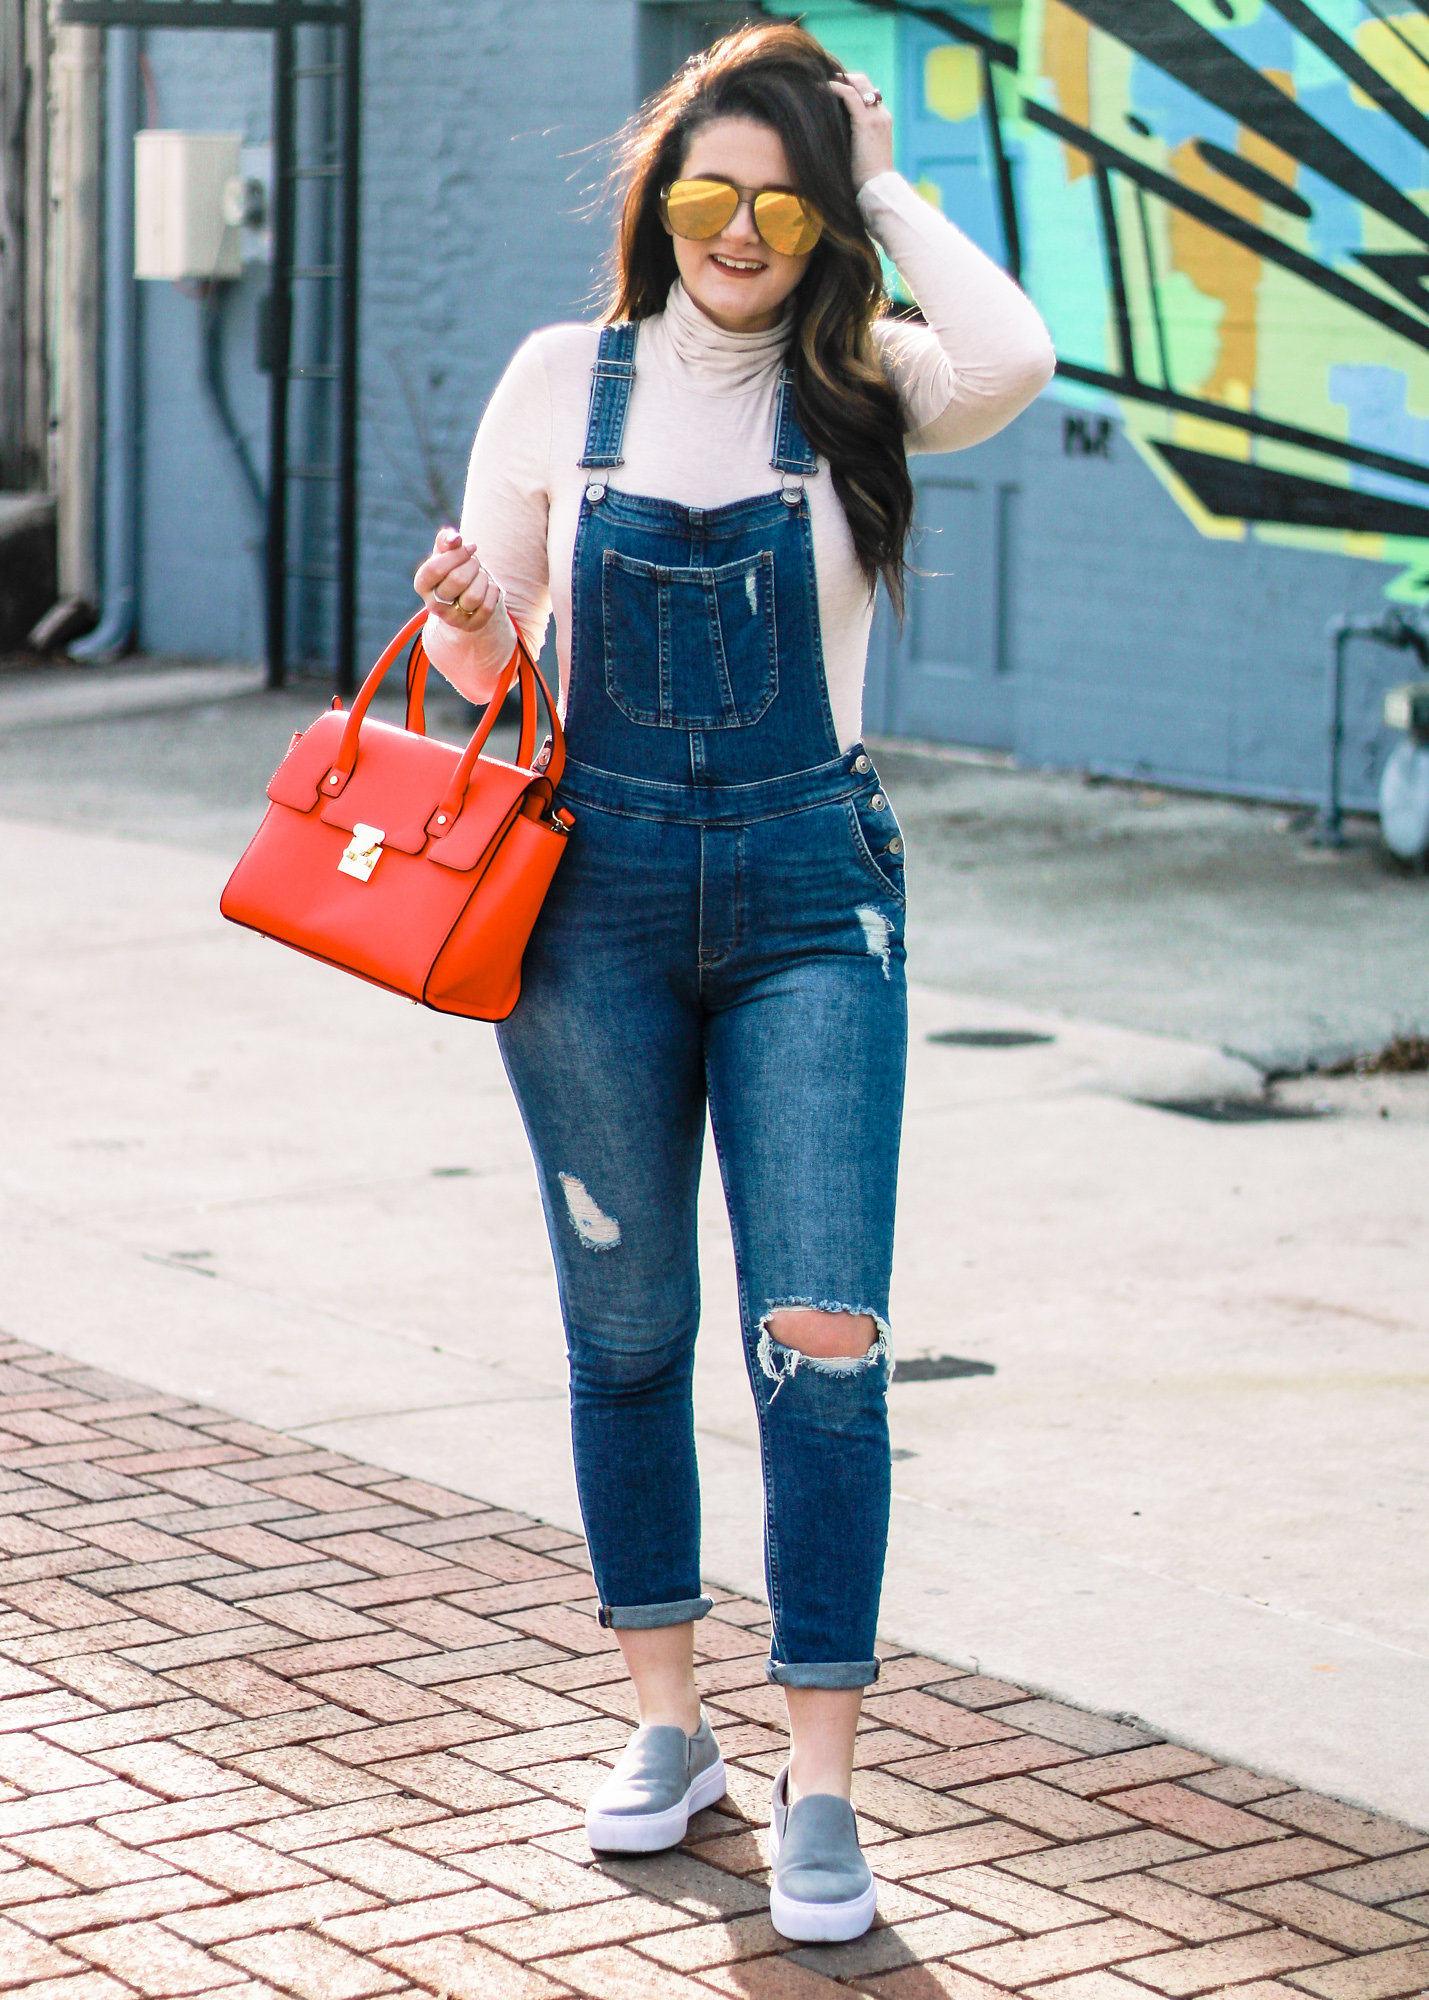 Why You Need Overalls in Your Wardrobe This Season